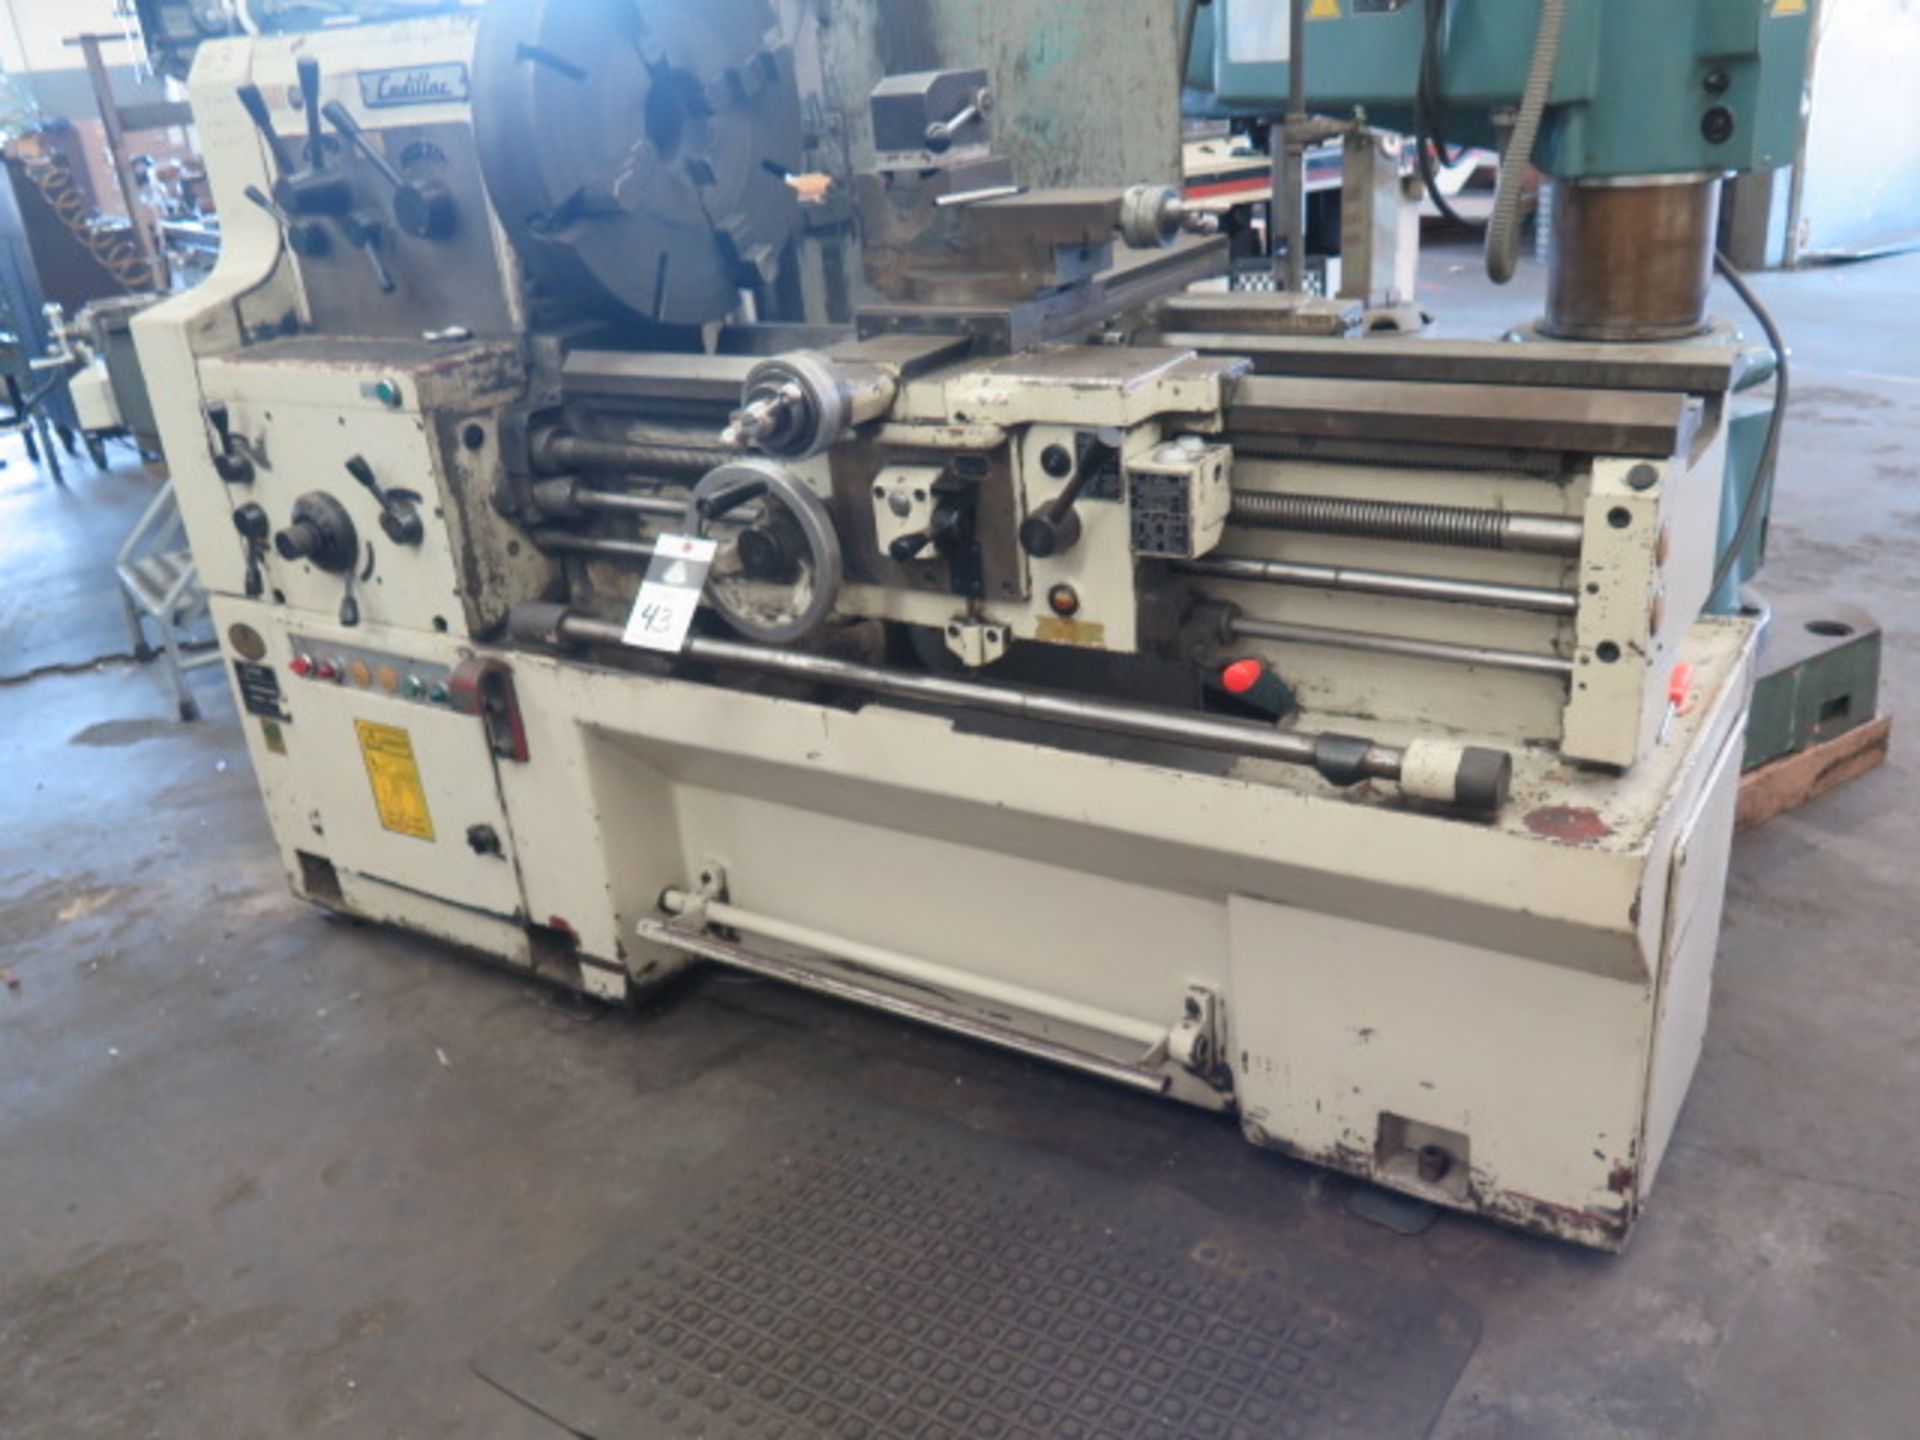 Cadillac 22” Geared Head Gap Bed Lathe s/n B92892 w/ 25-1500 RPM, Inch/mm Threading, SOLD AS IS - Image 2 of 11